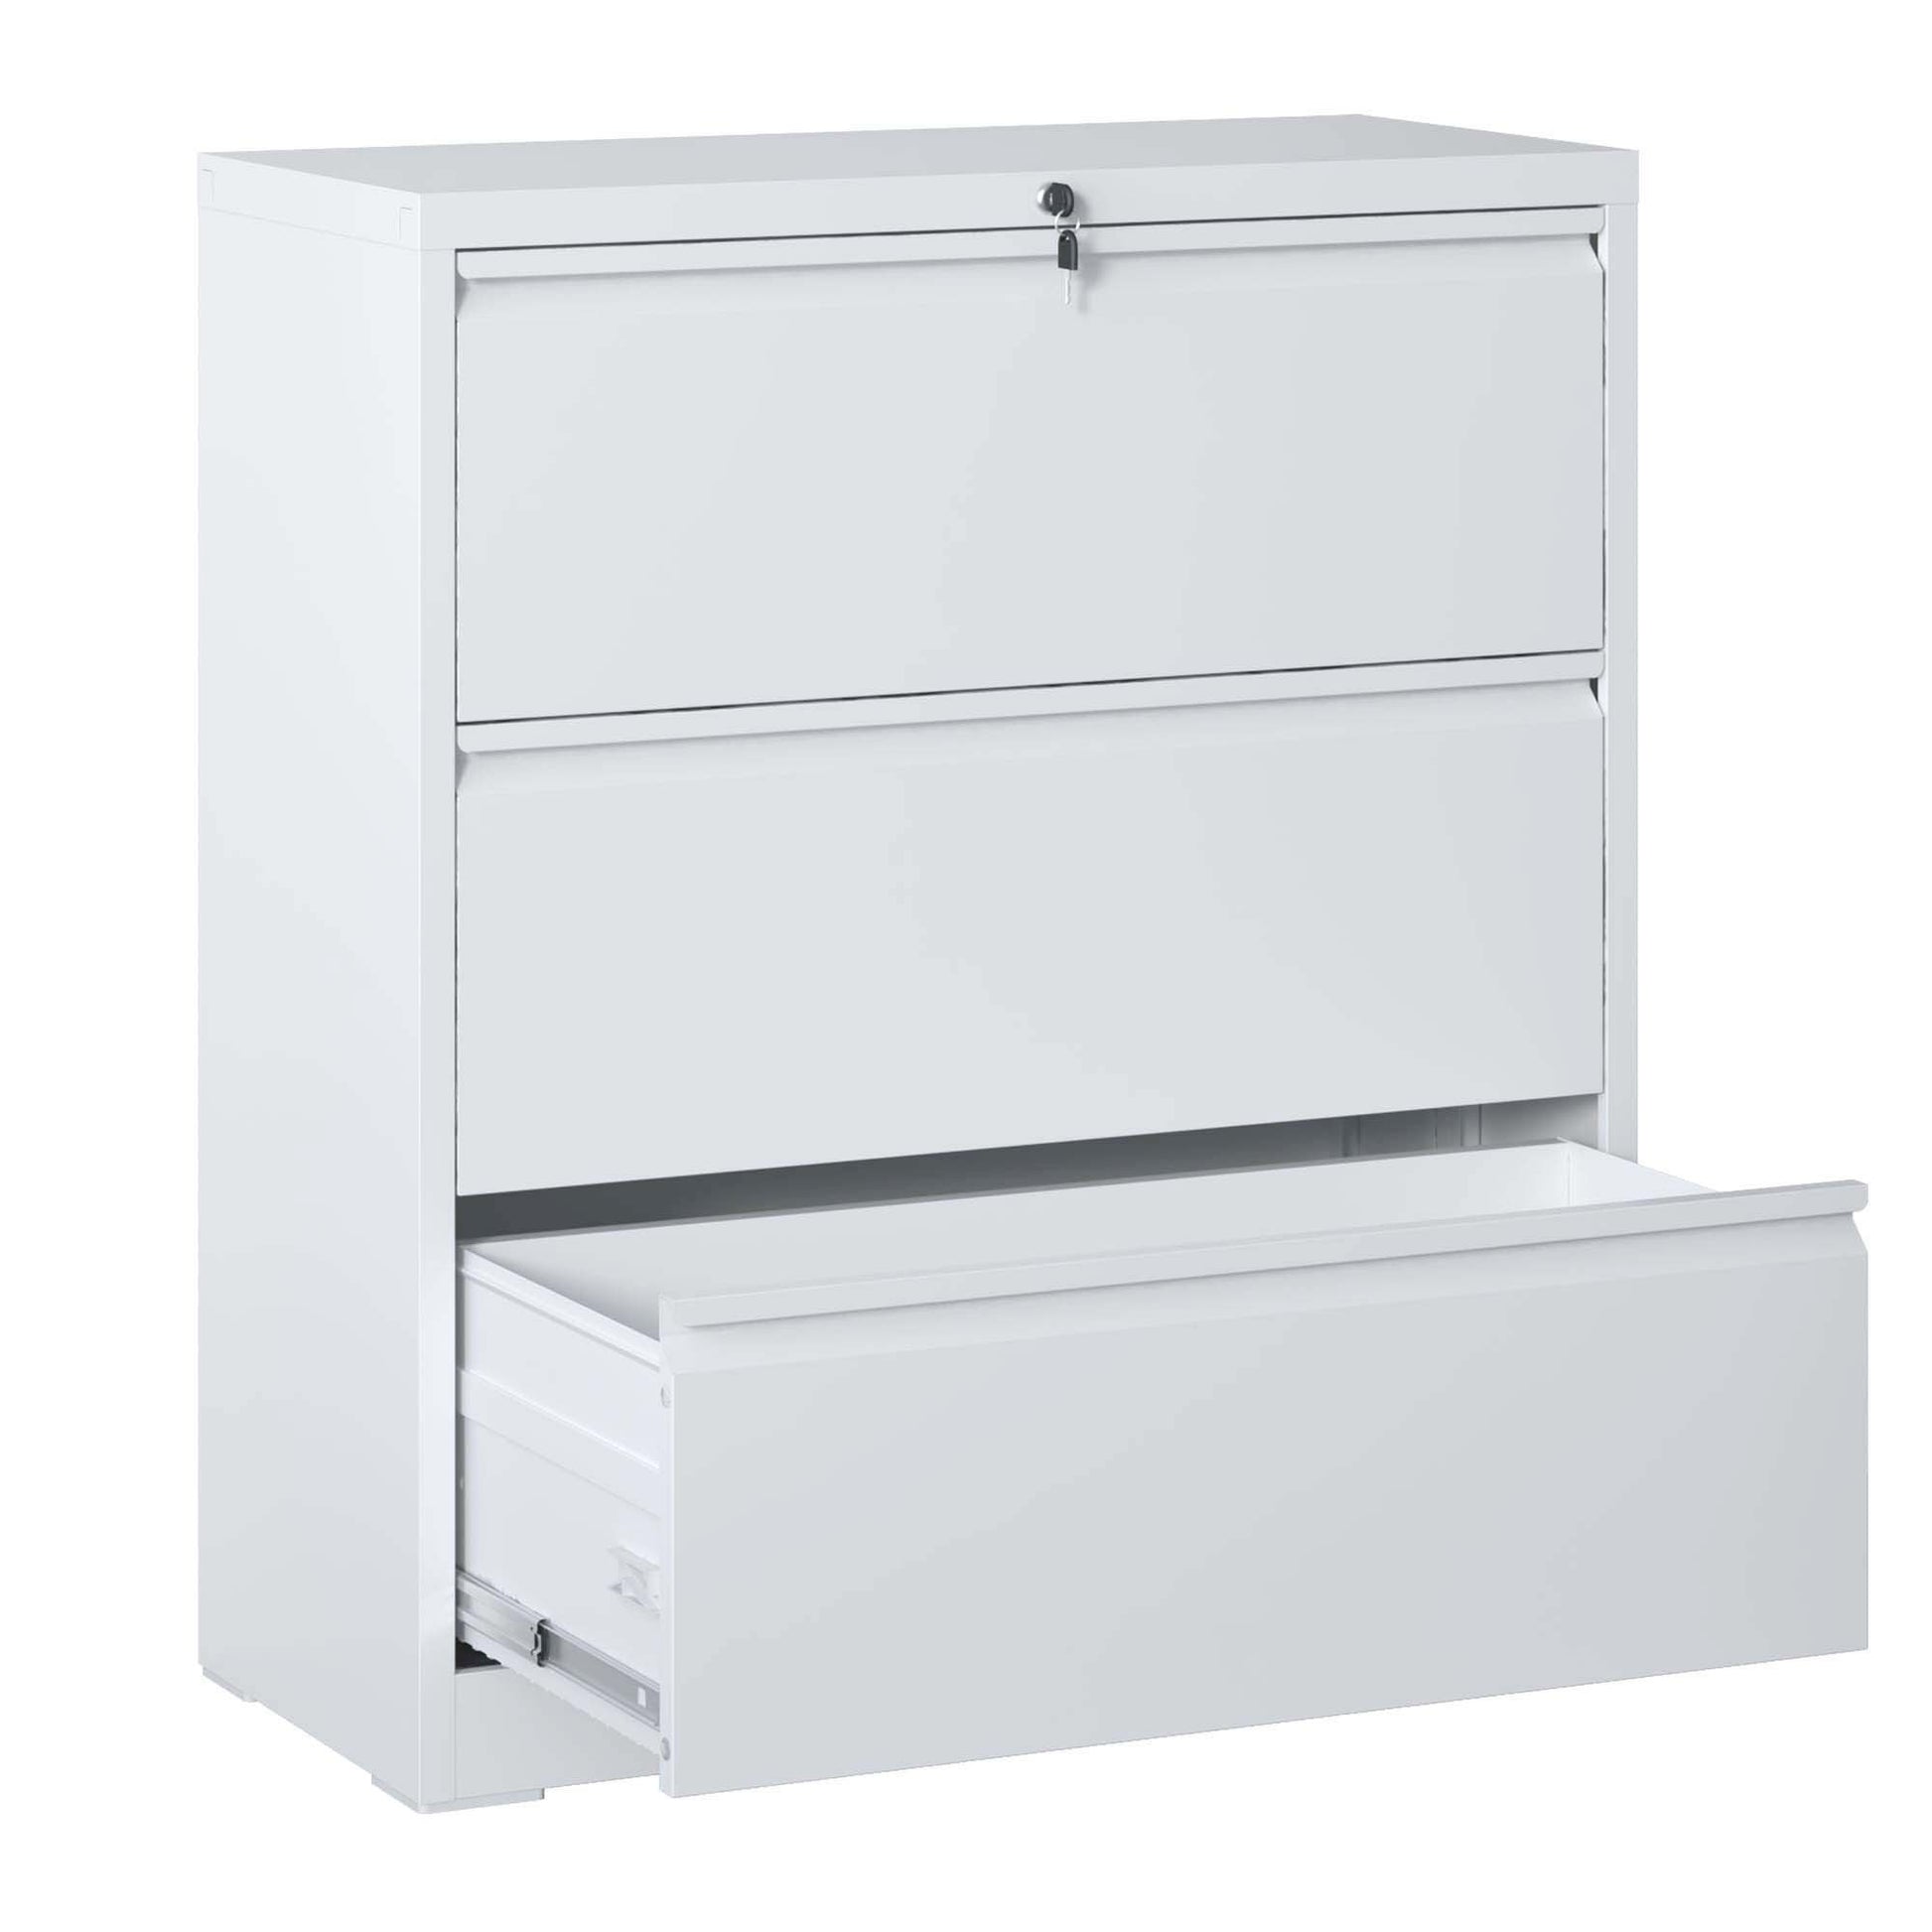 File Cabinet 3 Drawer, White Filing Cabinet Lockable Home Office